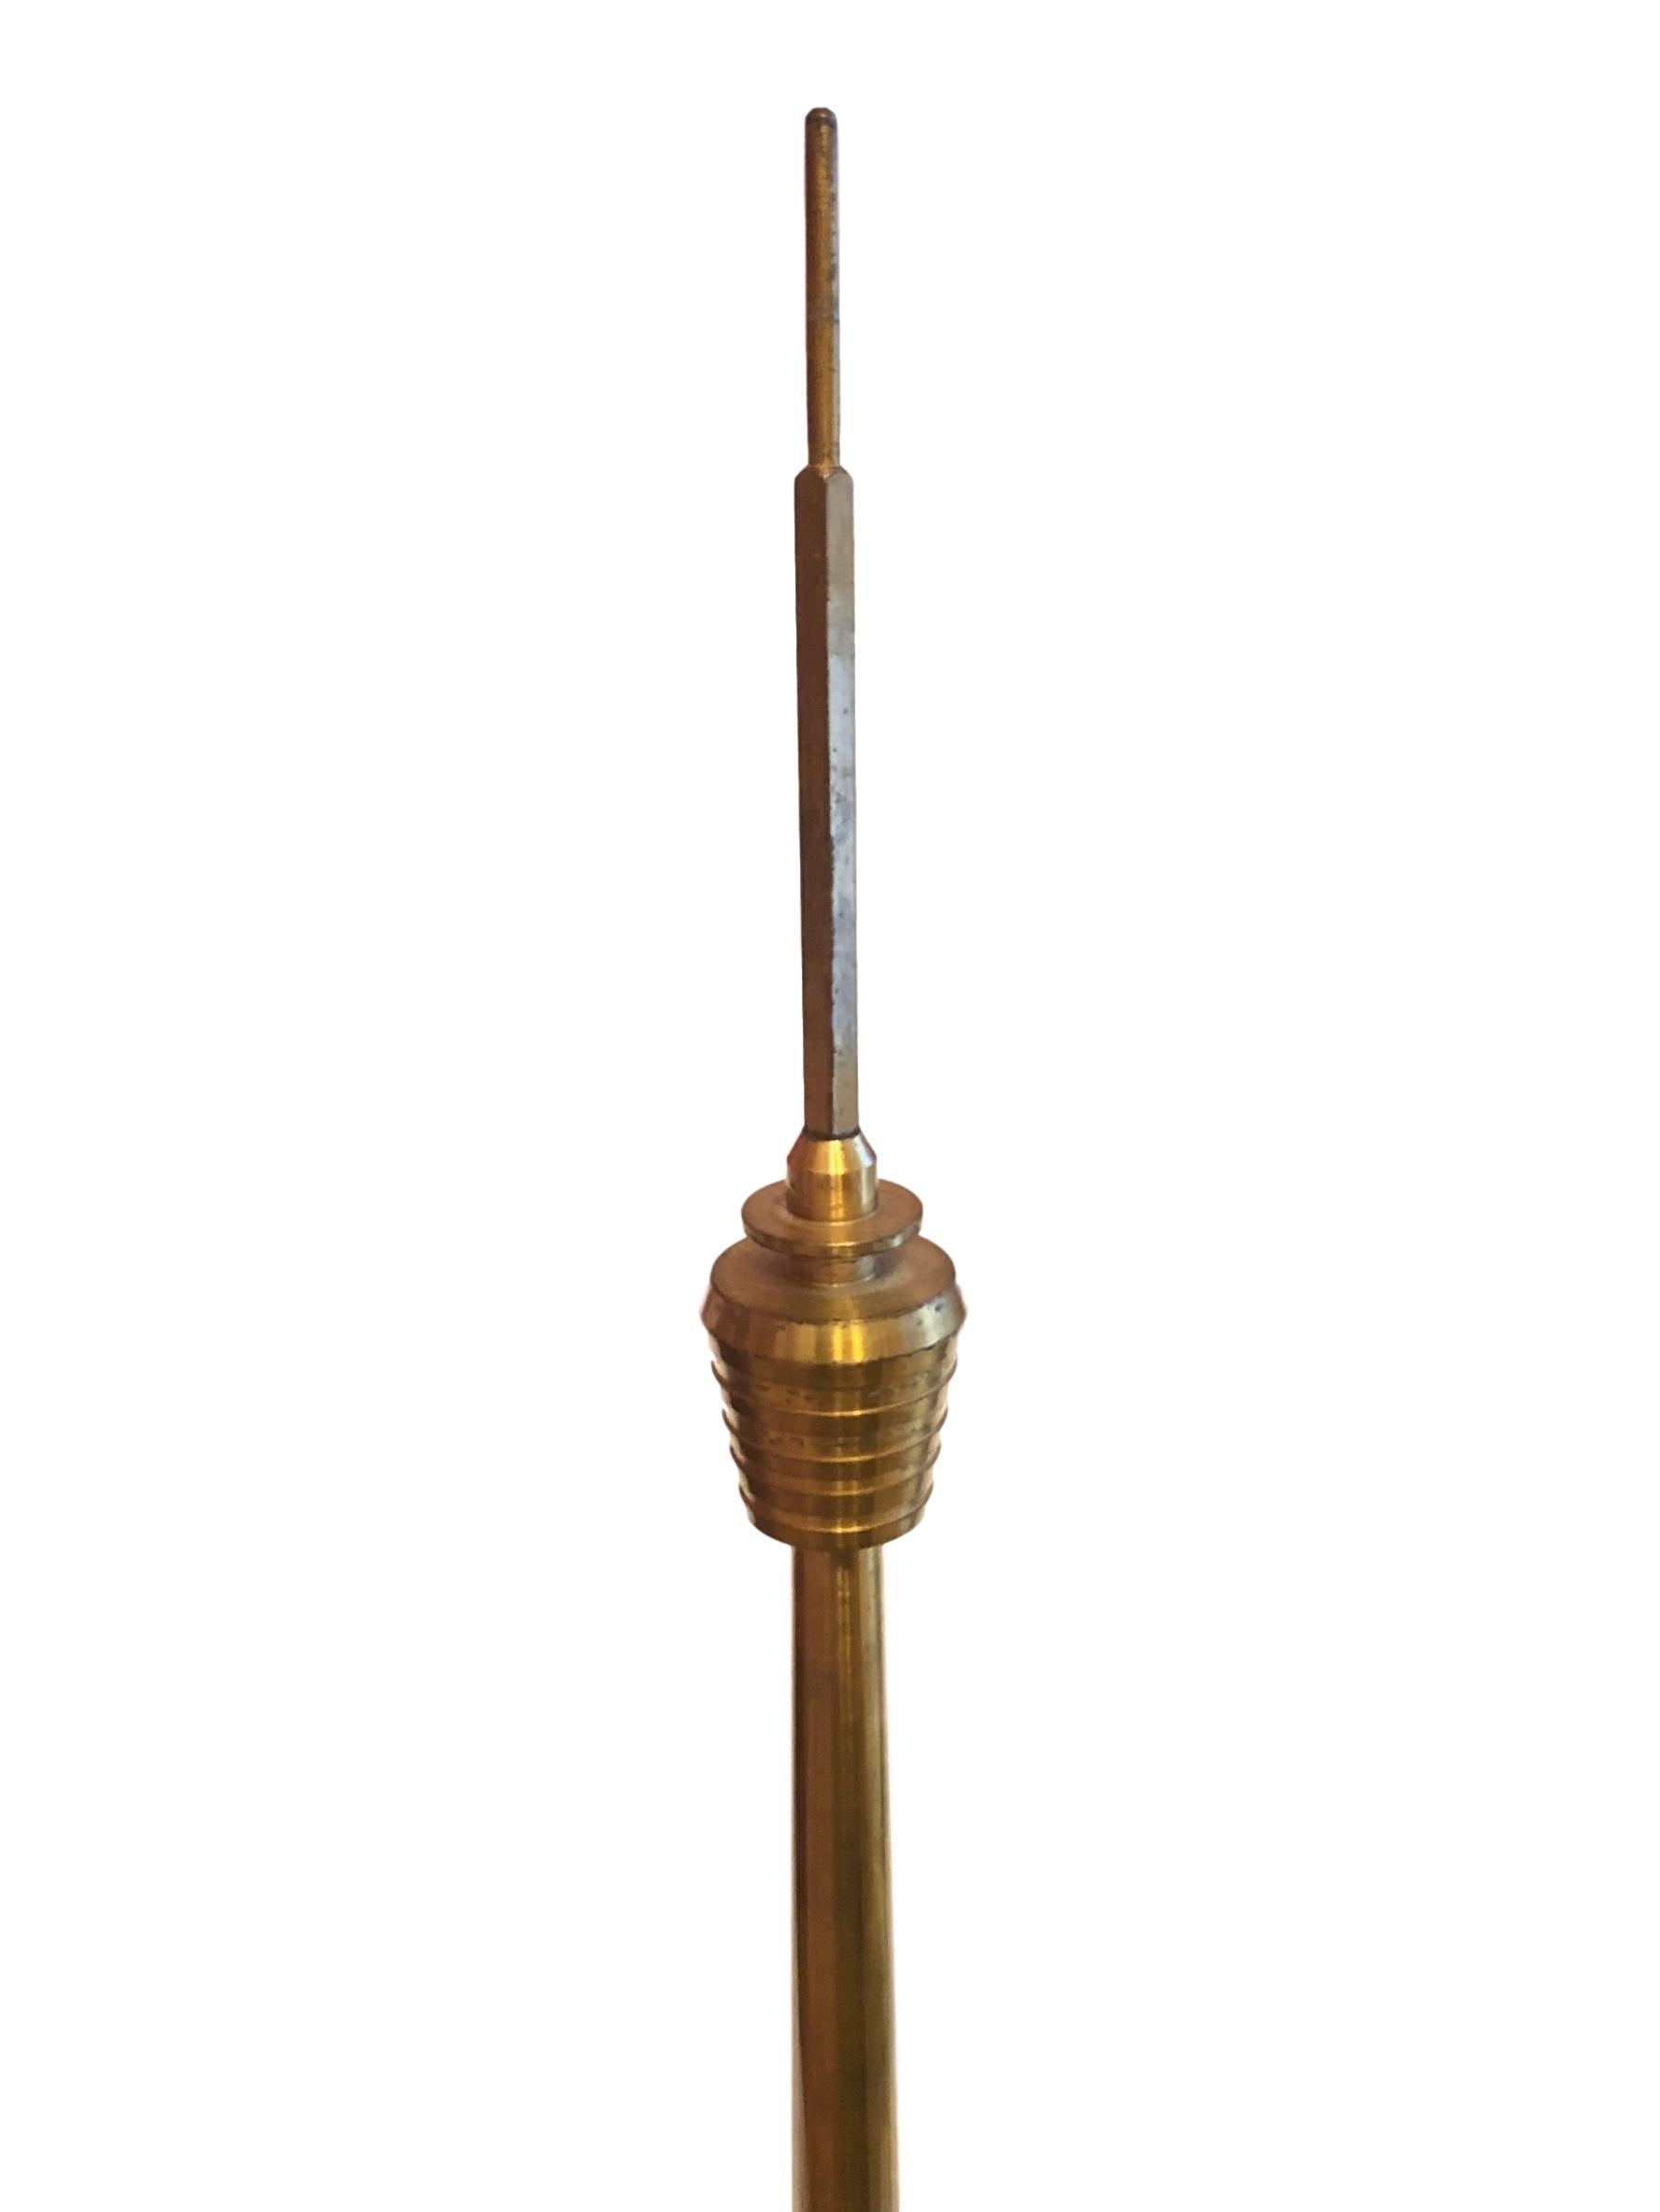 Scaled model of the Stuttgart television tower. Hand-spun in brass. A nice architectural sculpture for every living or men’s room. Some scratches and a nice patina due to the age.